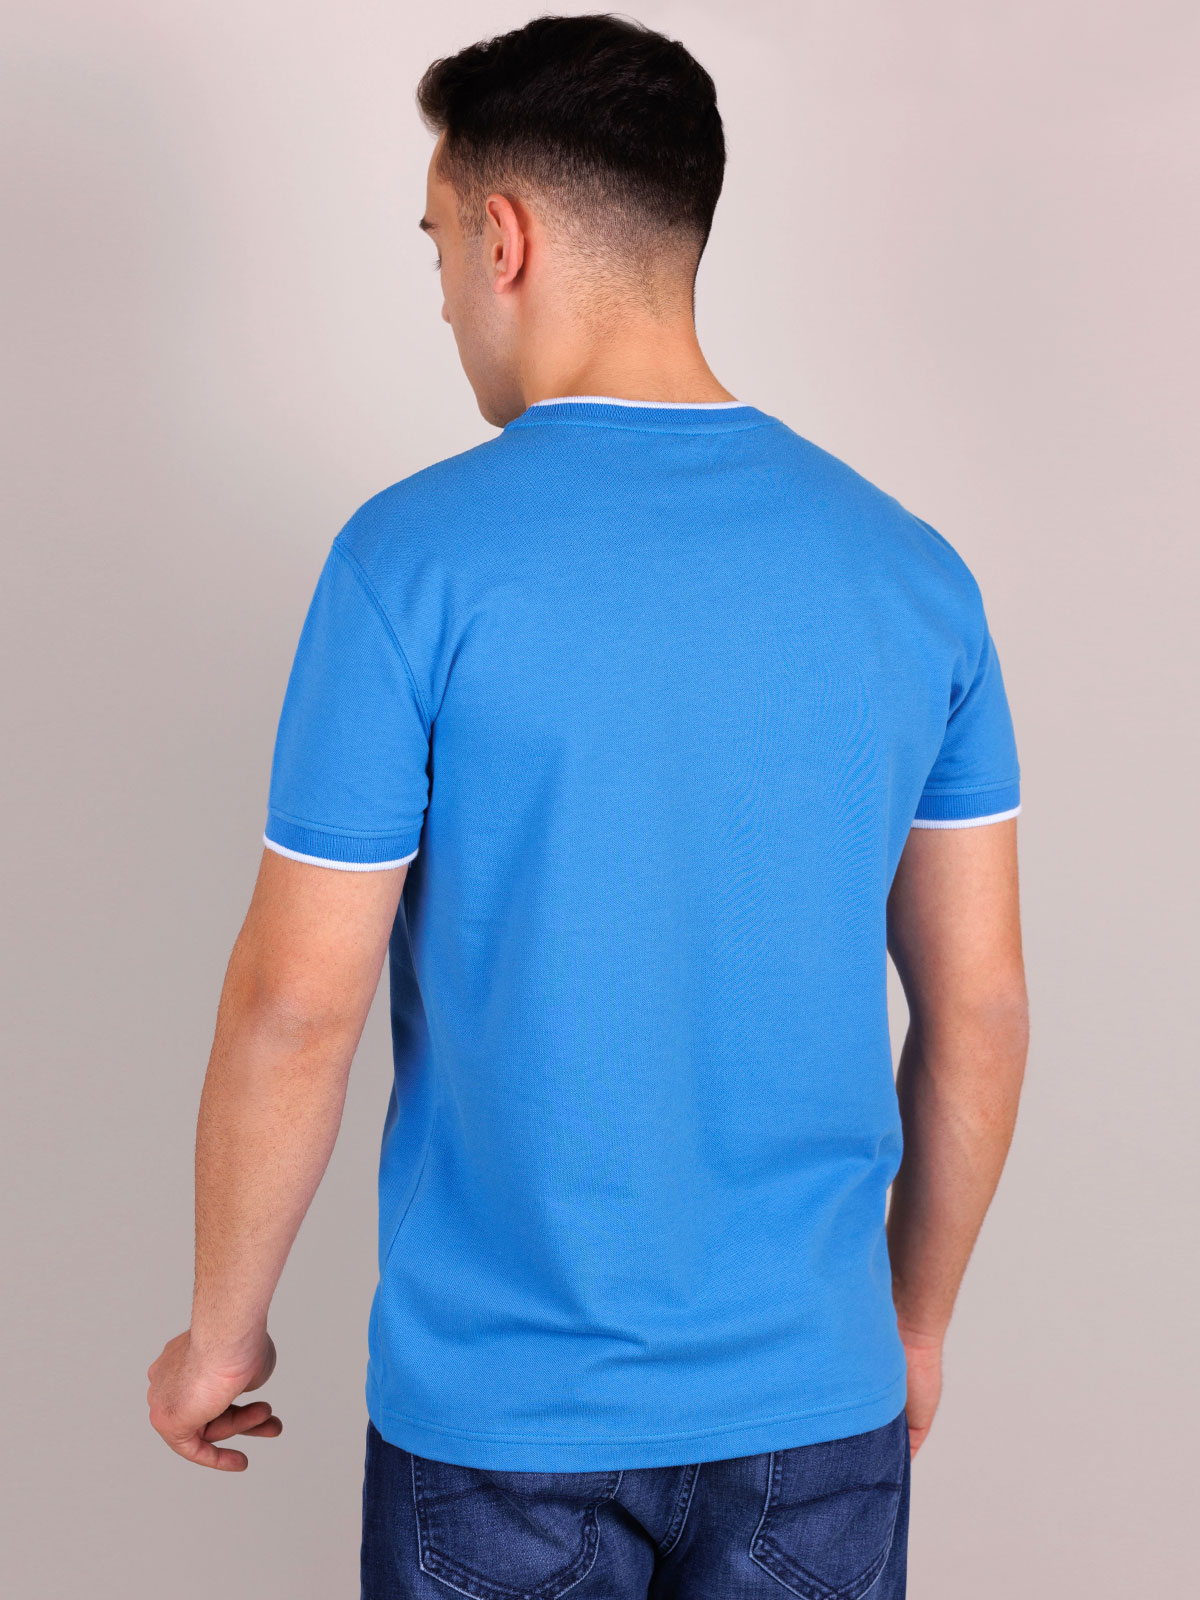 Tshirt in blue with a spectacular print - 95362 € 19.12 img4